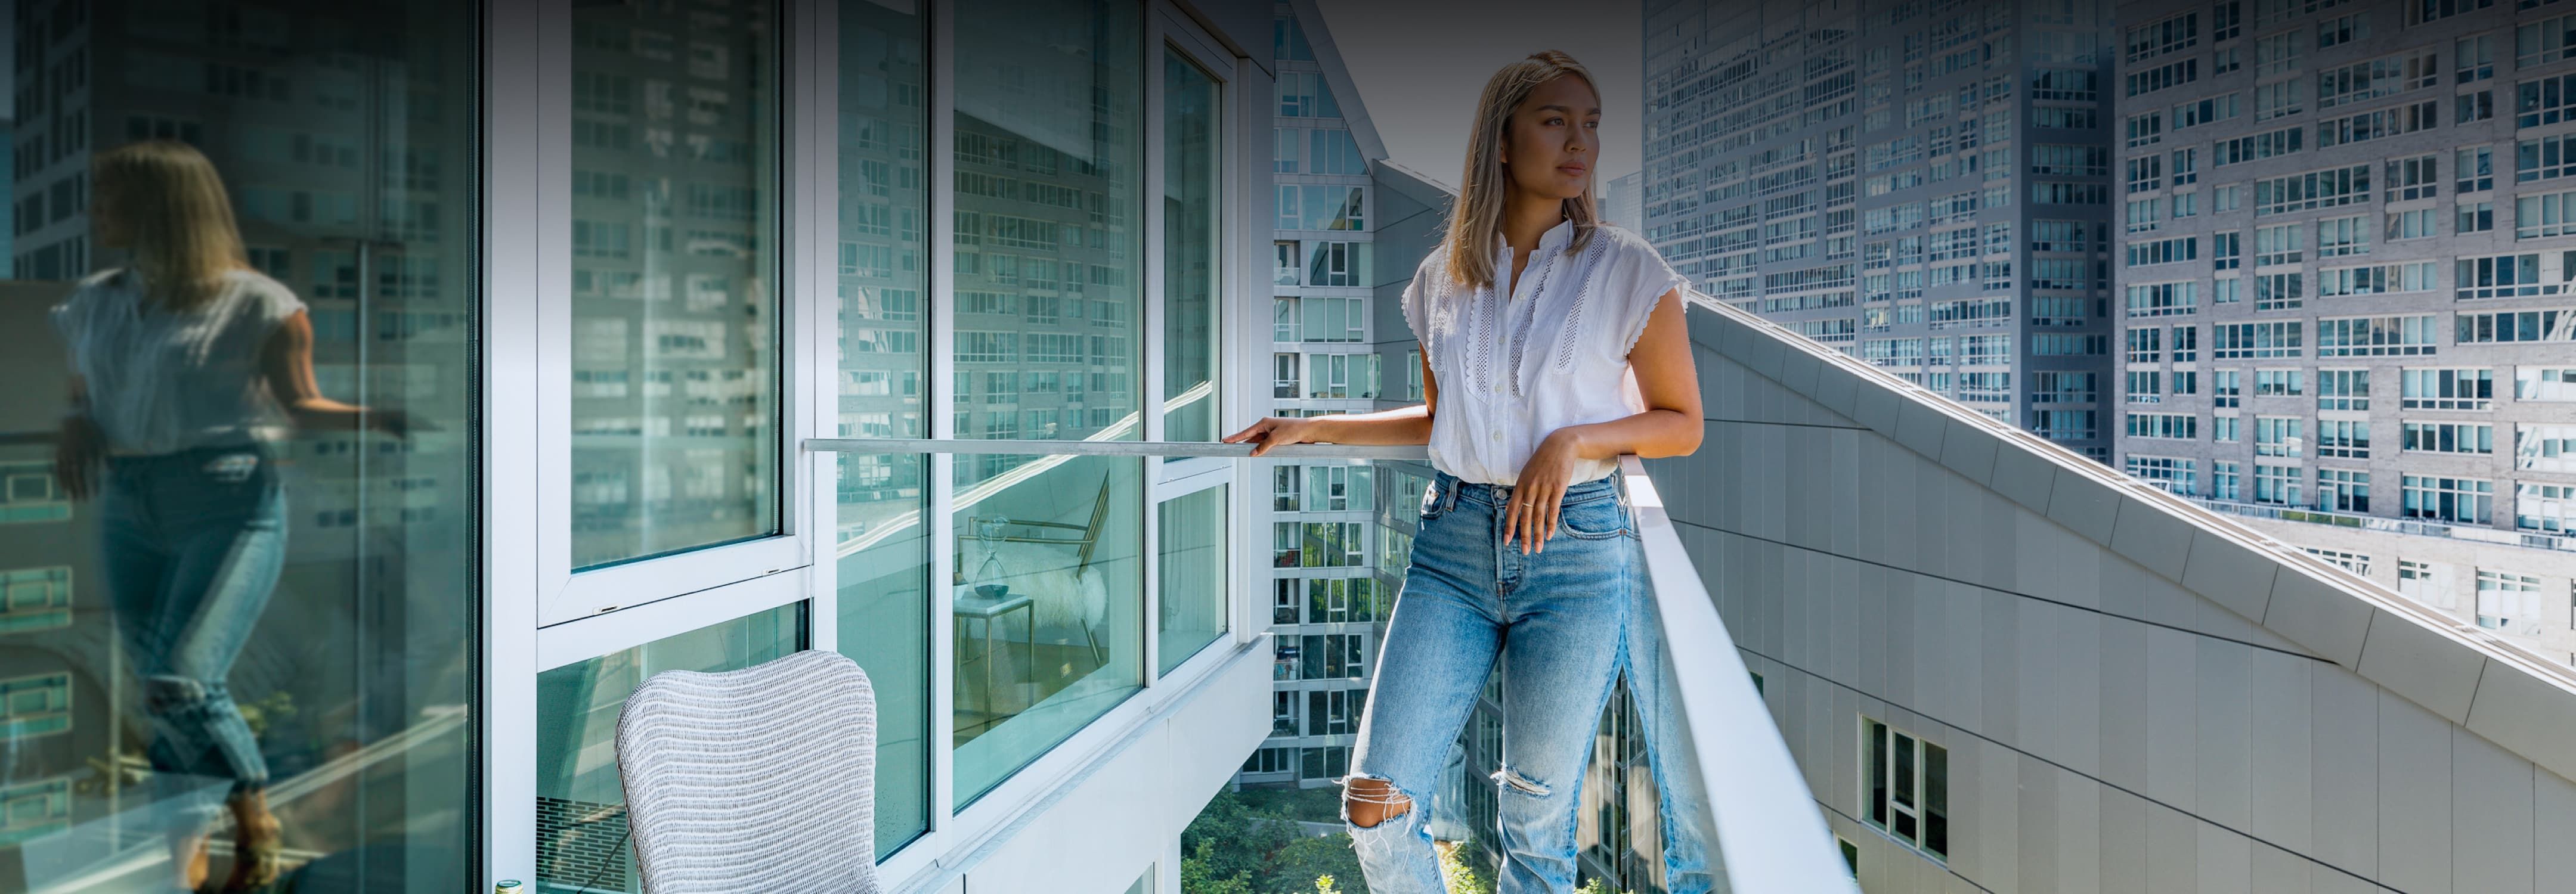 Woman on balcony with cityscape reflection, casual style, high-rise background.